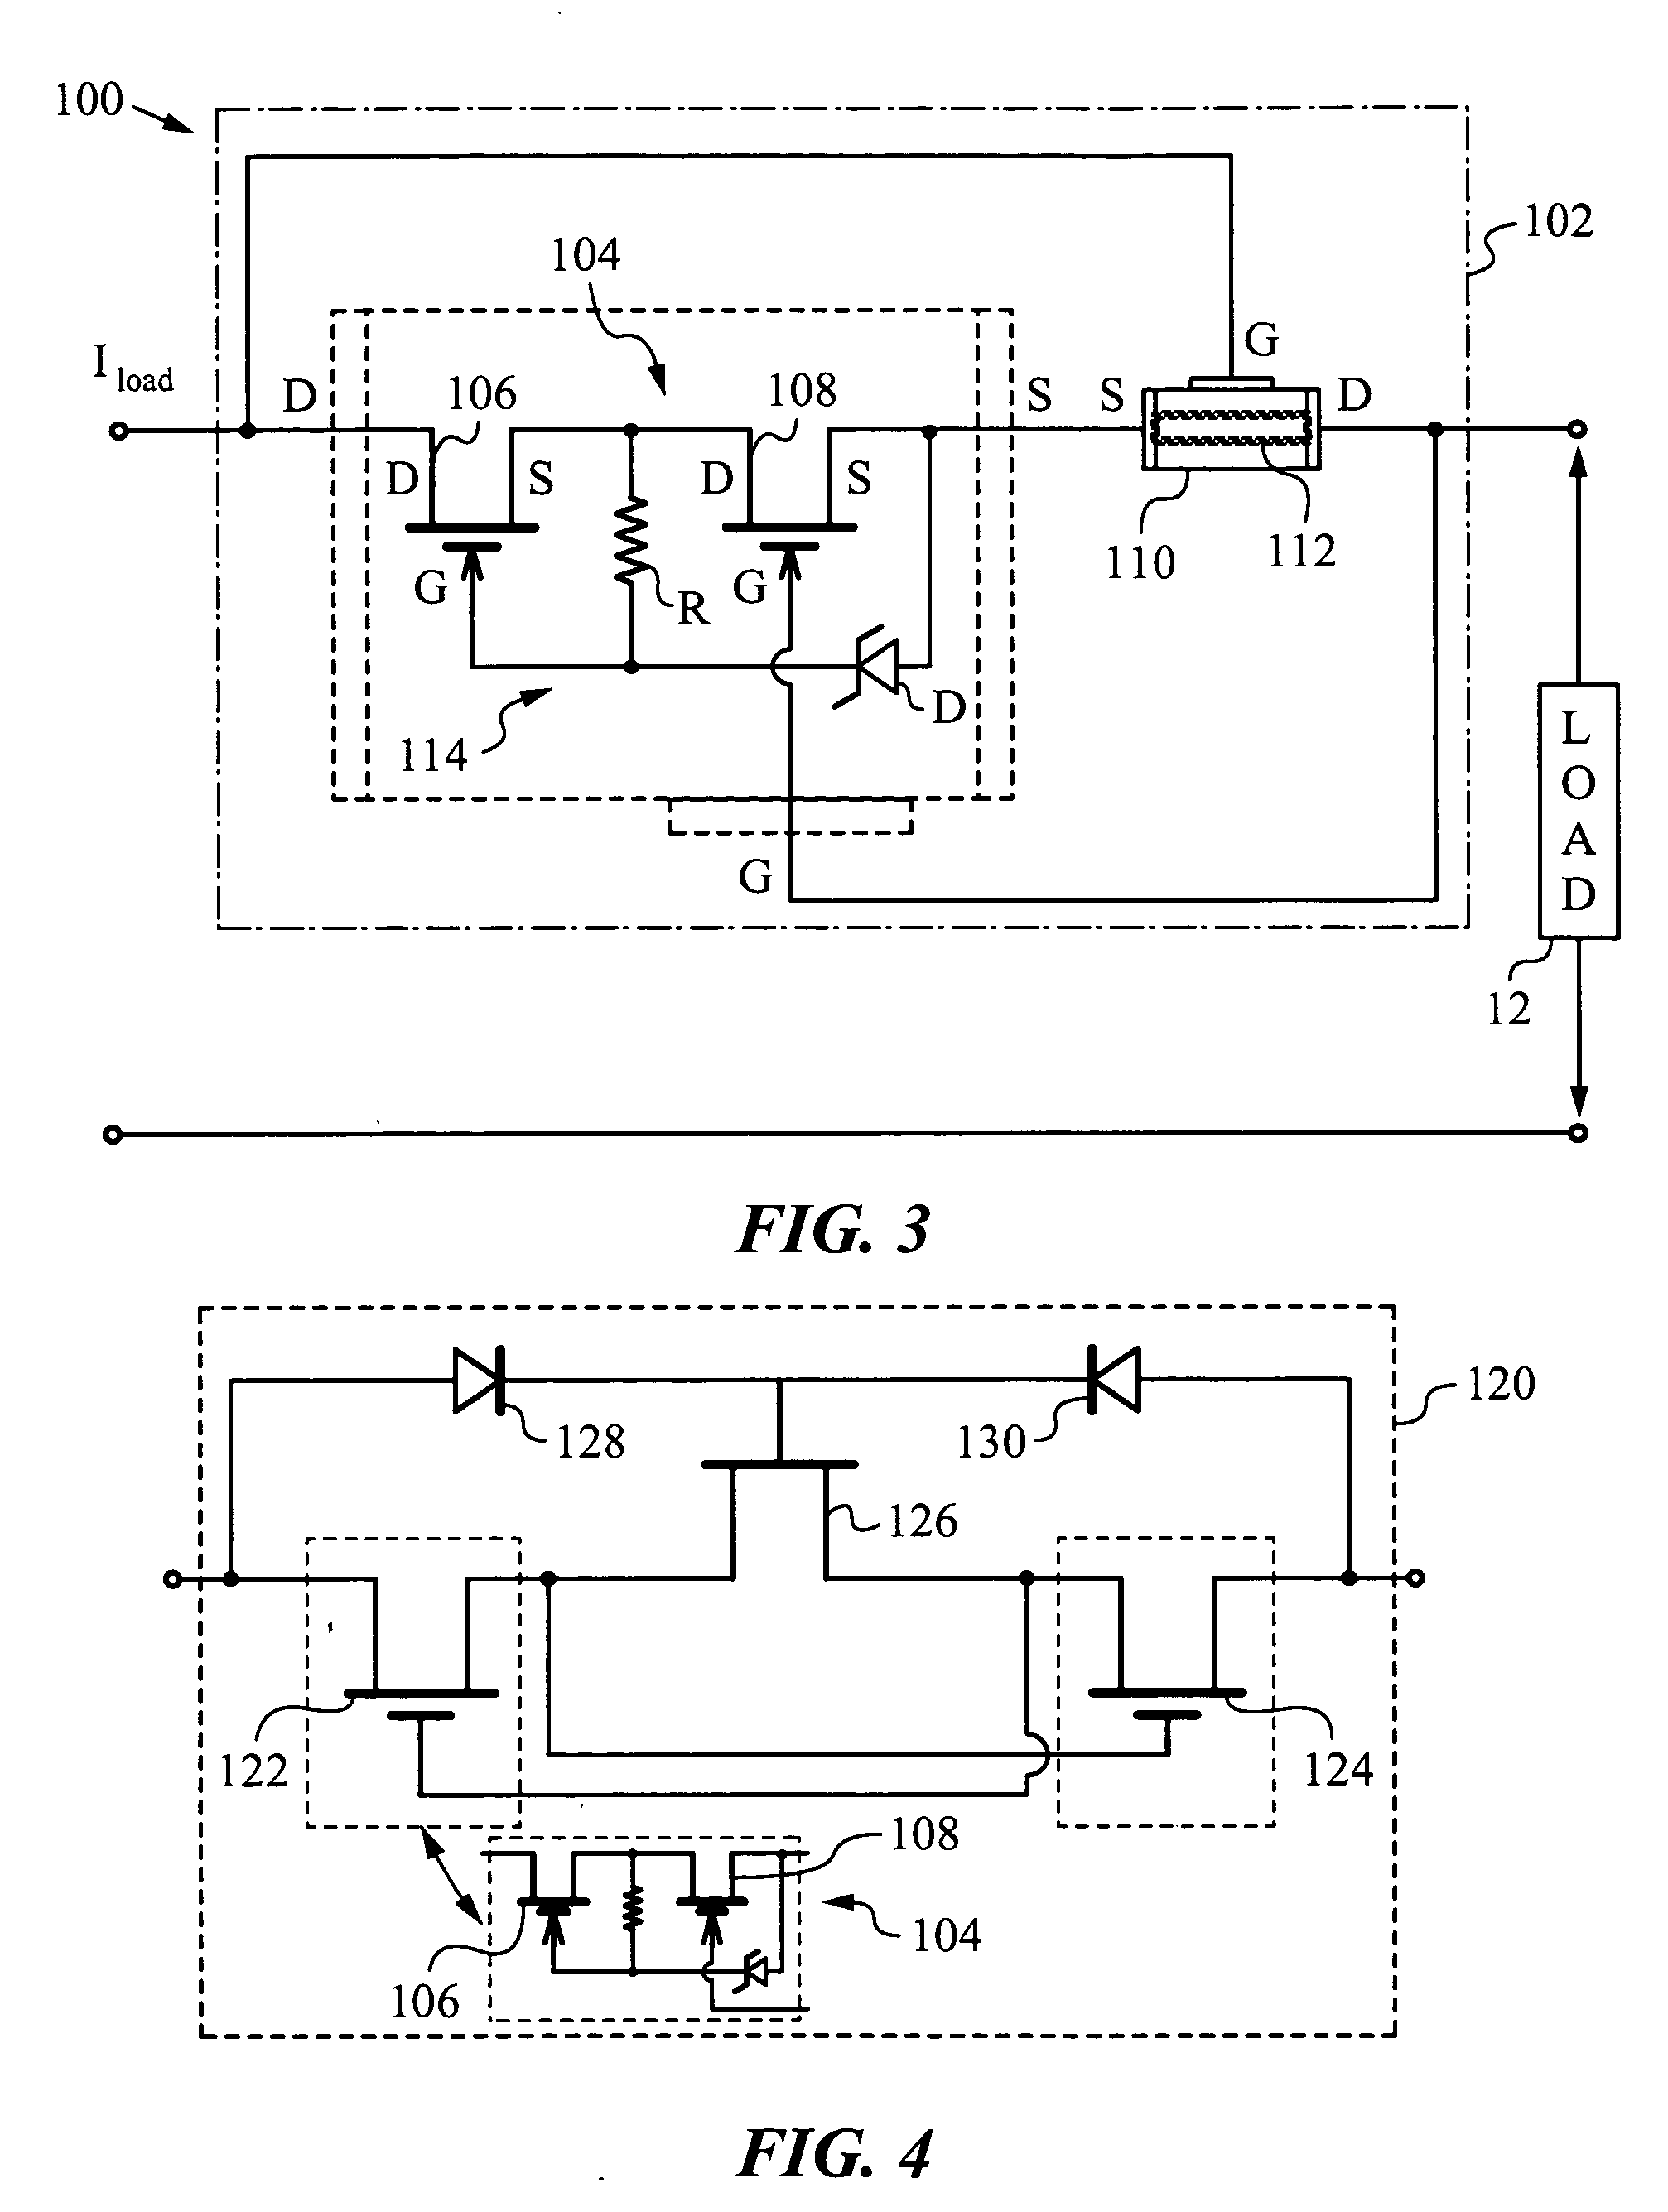 Apparatus and method for high-voltage transient blocking using low-voltage elements